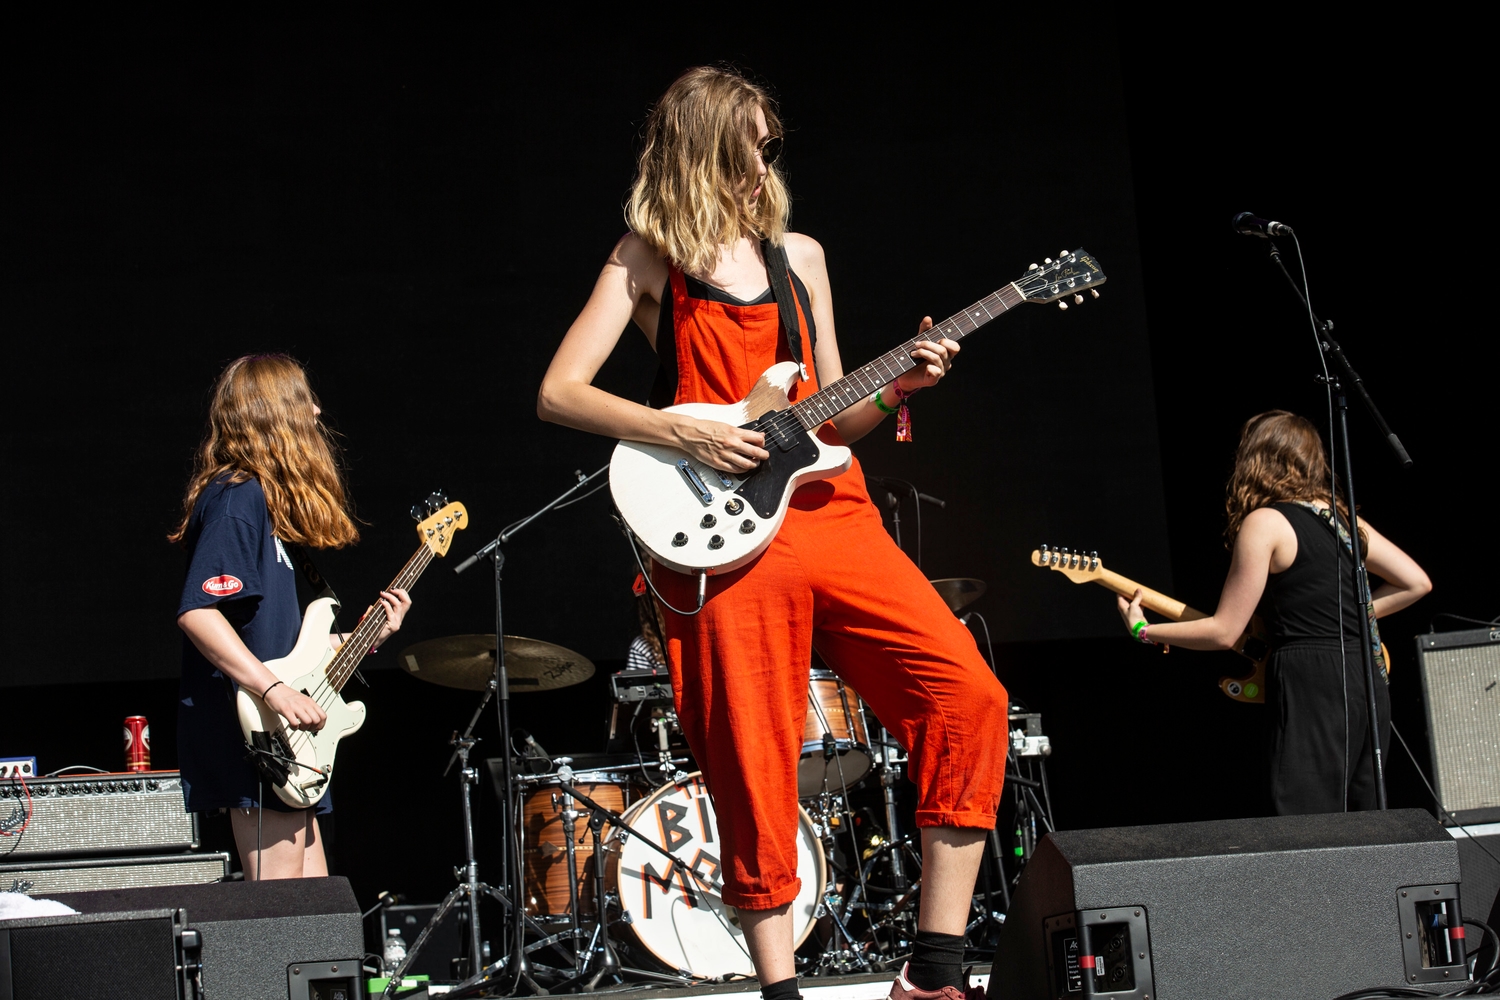 The Big Moon serve up slabs of sunshiney indie rock at Bestival 2018